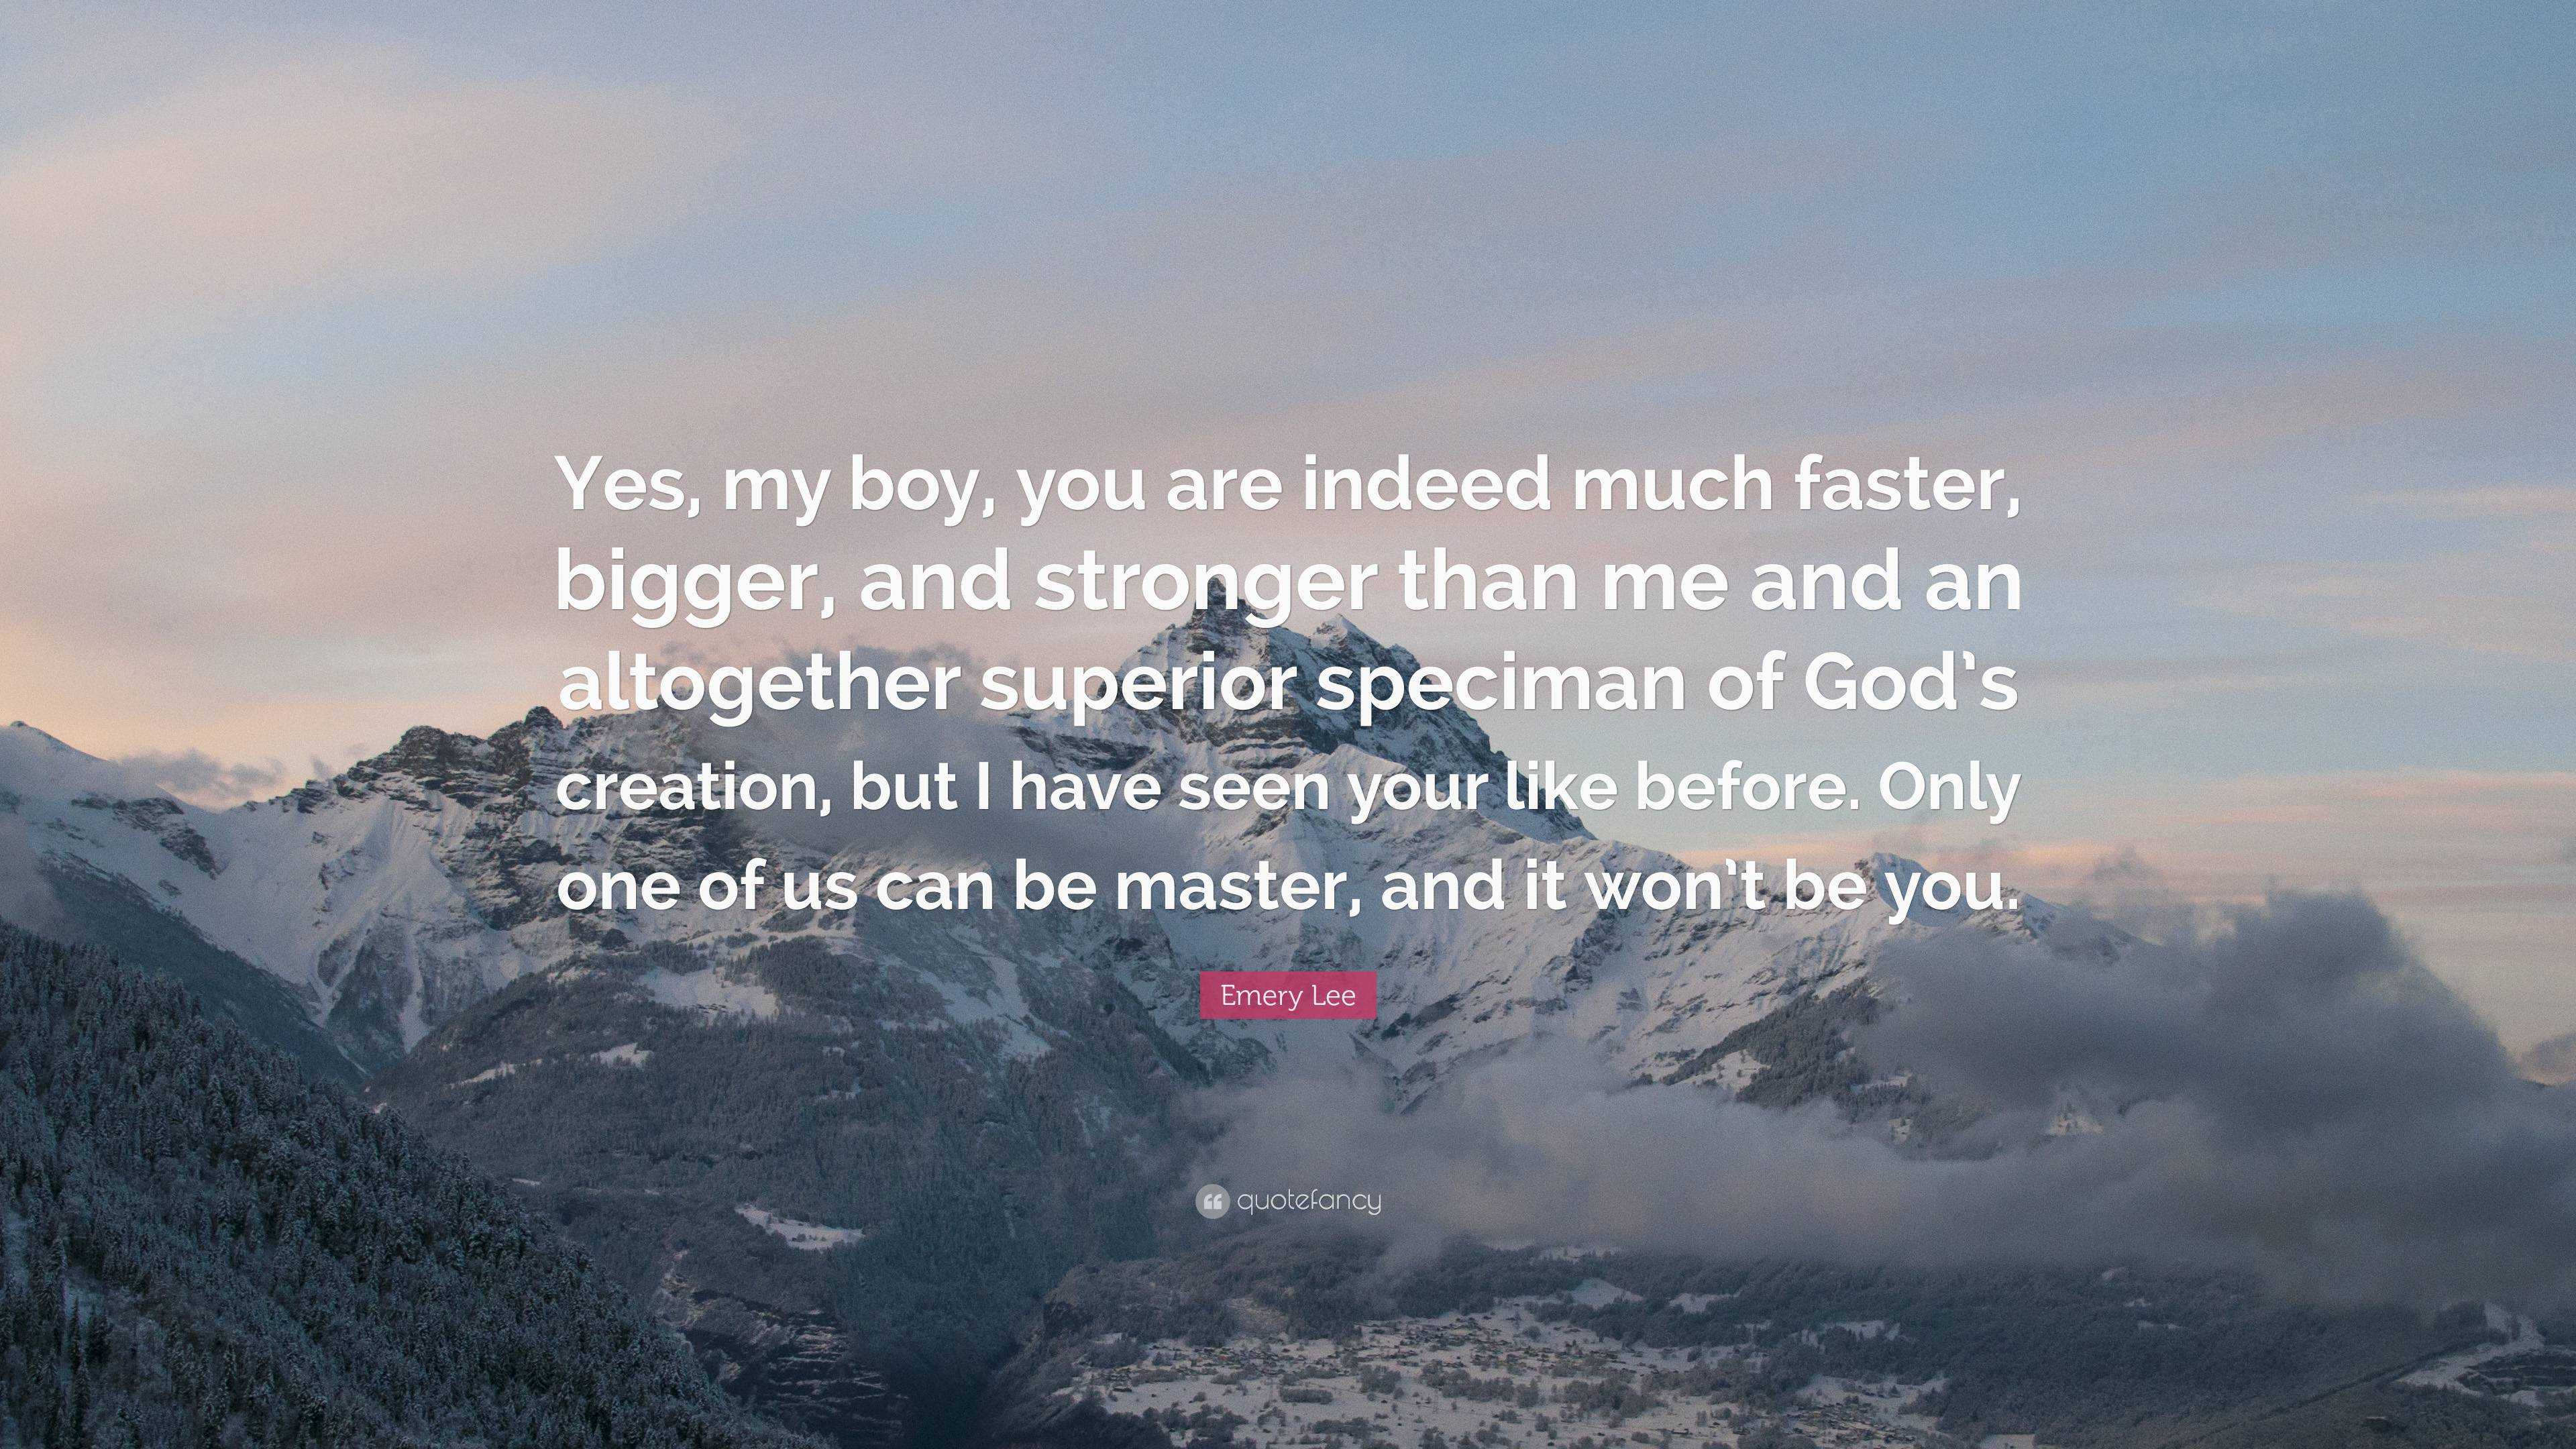 Emery Lee Quote: “Yes, my boy, you are indeed much faster, bigger, and  stronger than me and an altogether superior speciman of God's creat...”